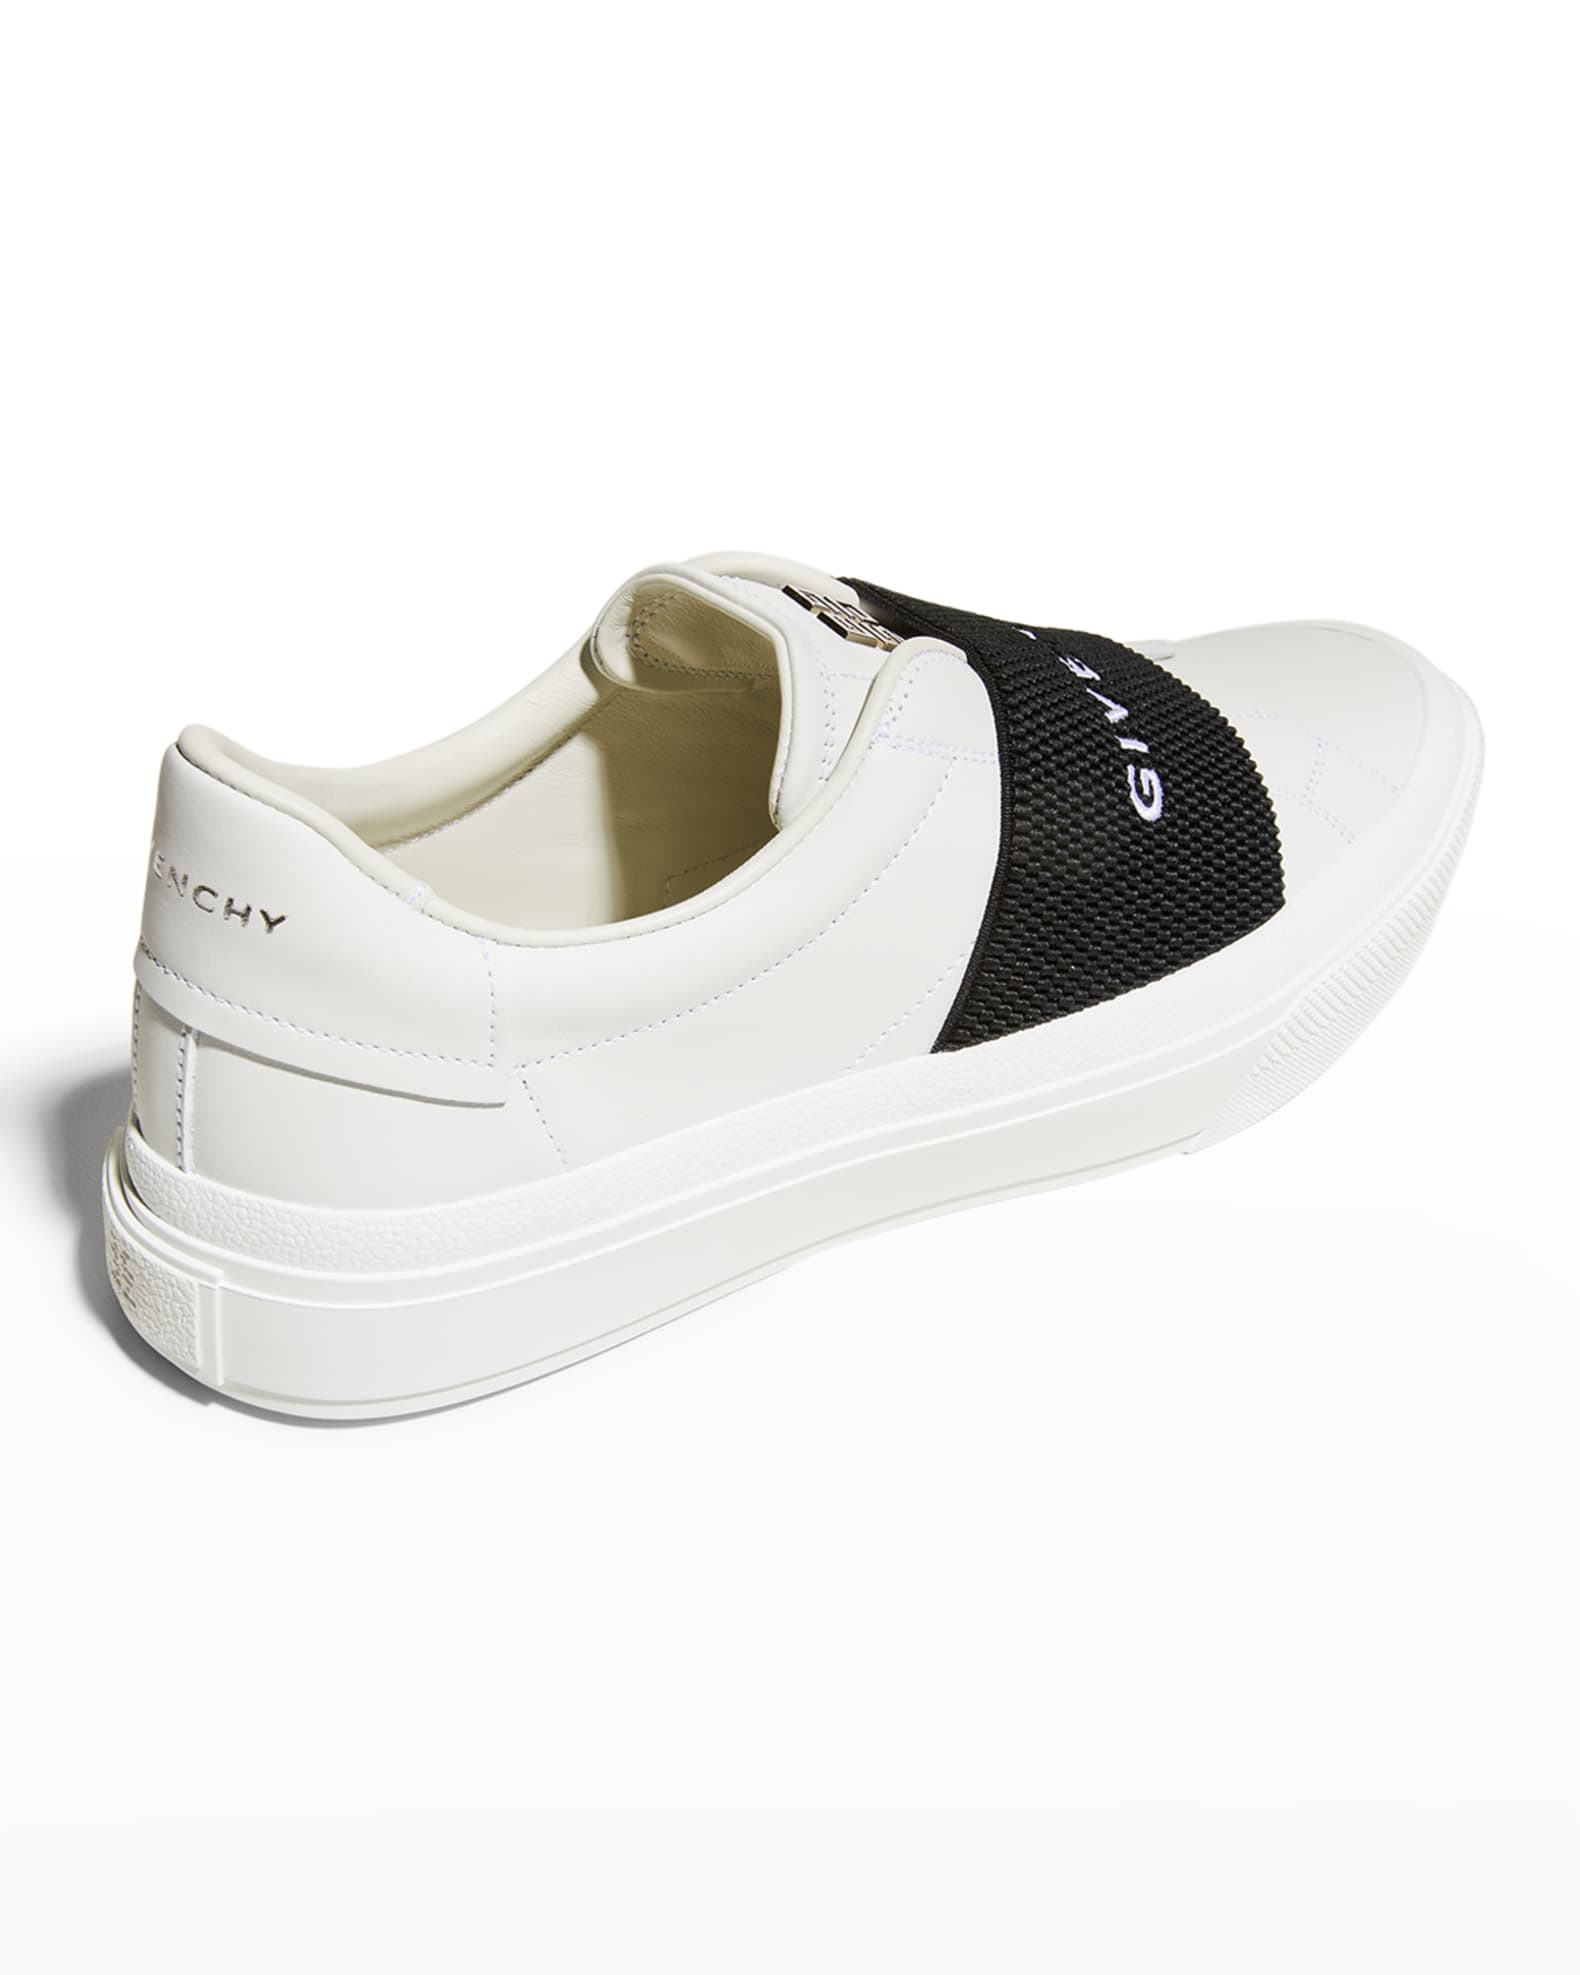 Givenchy City Court Logo Slip-on Sneakers | Neiman Marcus